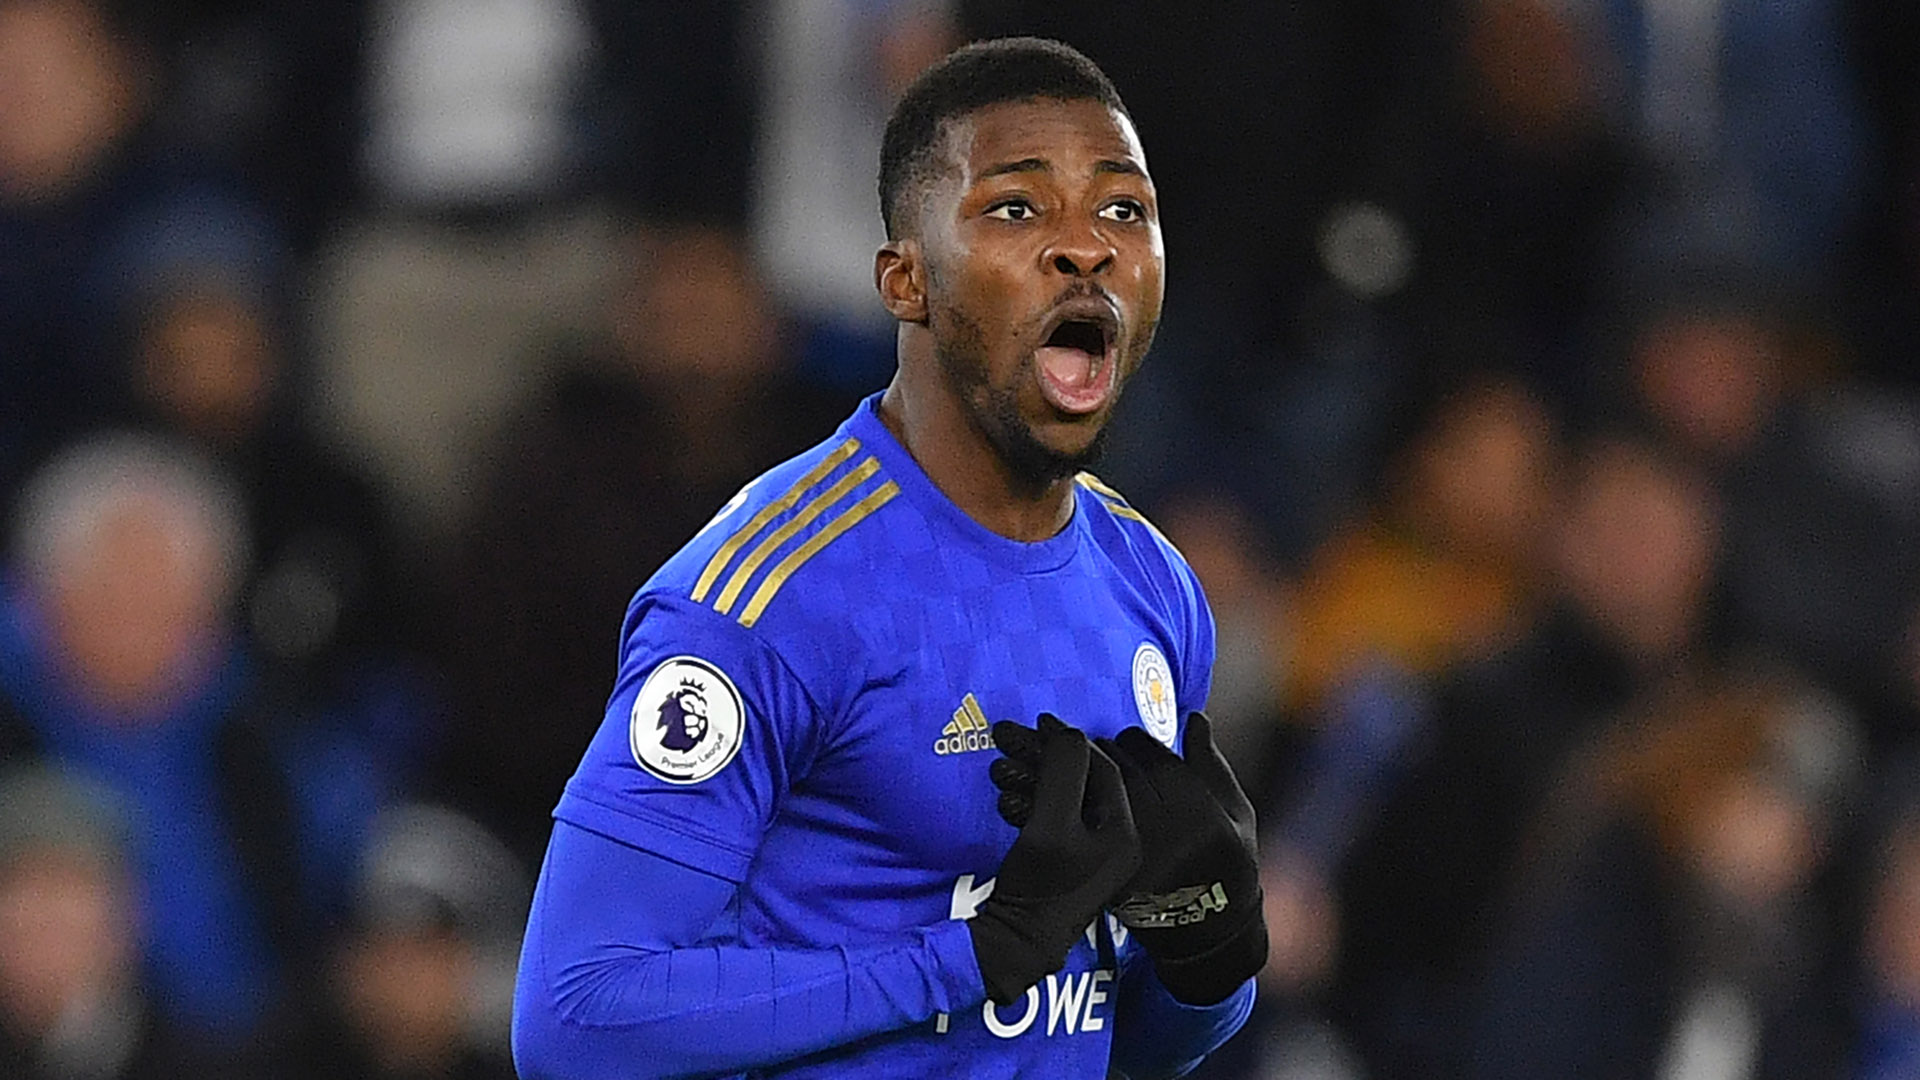 Iheanacho tasks Leicester City to ‘fight until the end’ after Everton loss